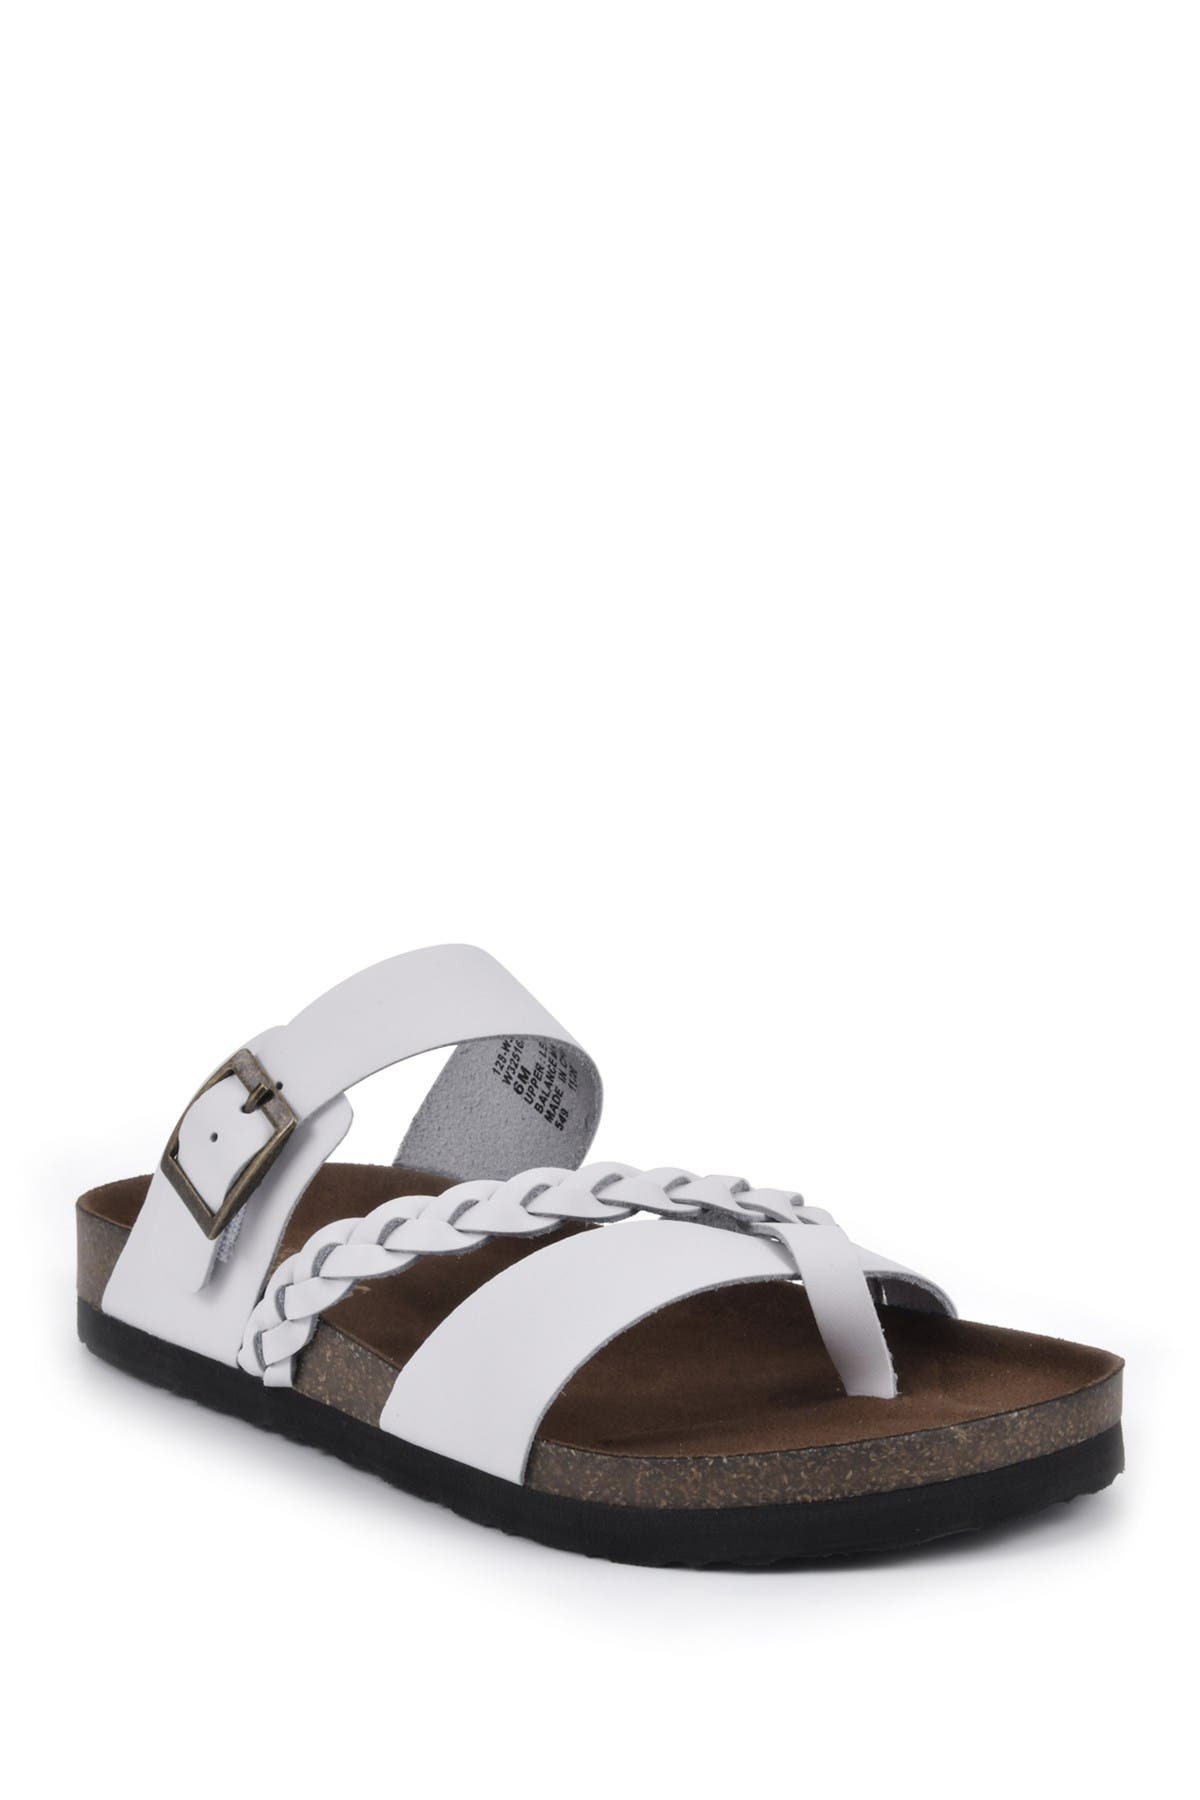 White Mountain Footwear Hazy Leather Footbed Sandal In White/leather